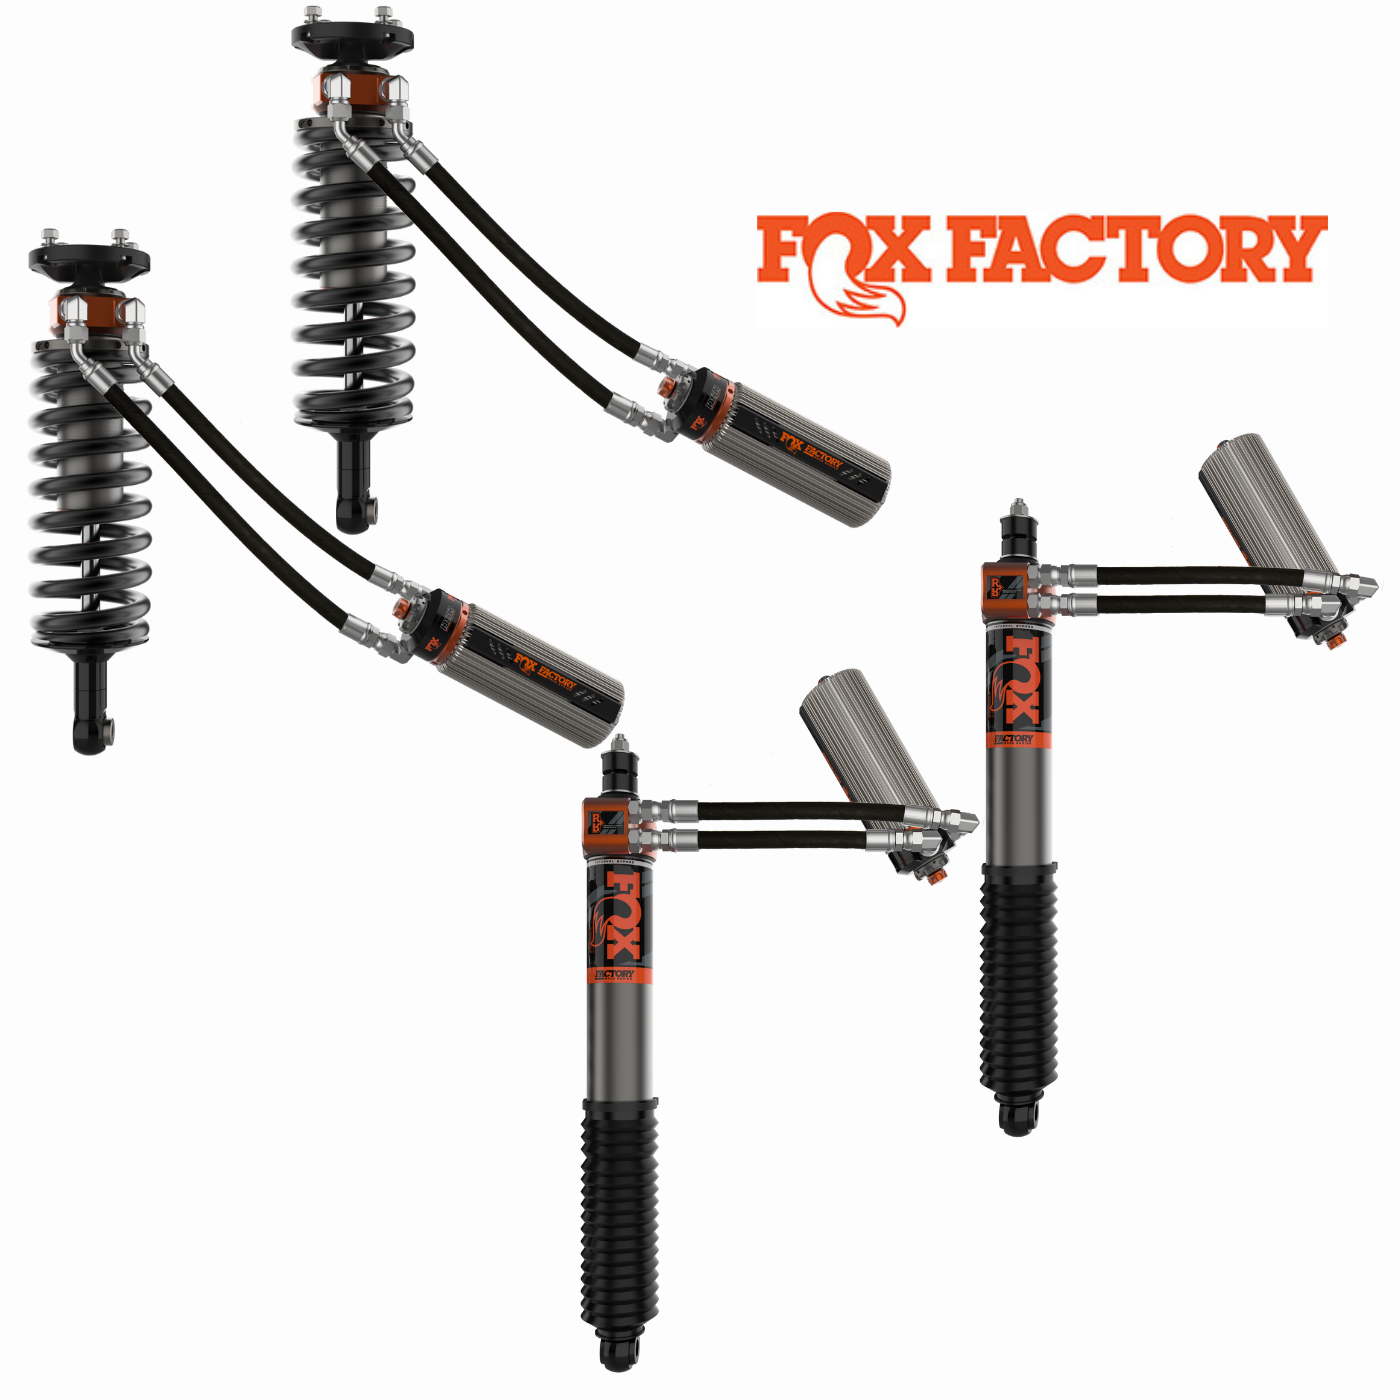 '22-24 Toyota Tundra FOX 3.0 FACTORY RACE RR Coilovers & Rear Shocks (0-1" Lift) w/ Upper Arms & Trailing Arm Combo Kit